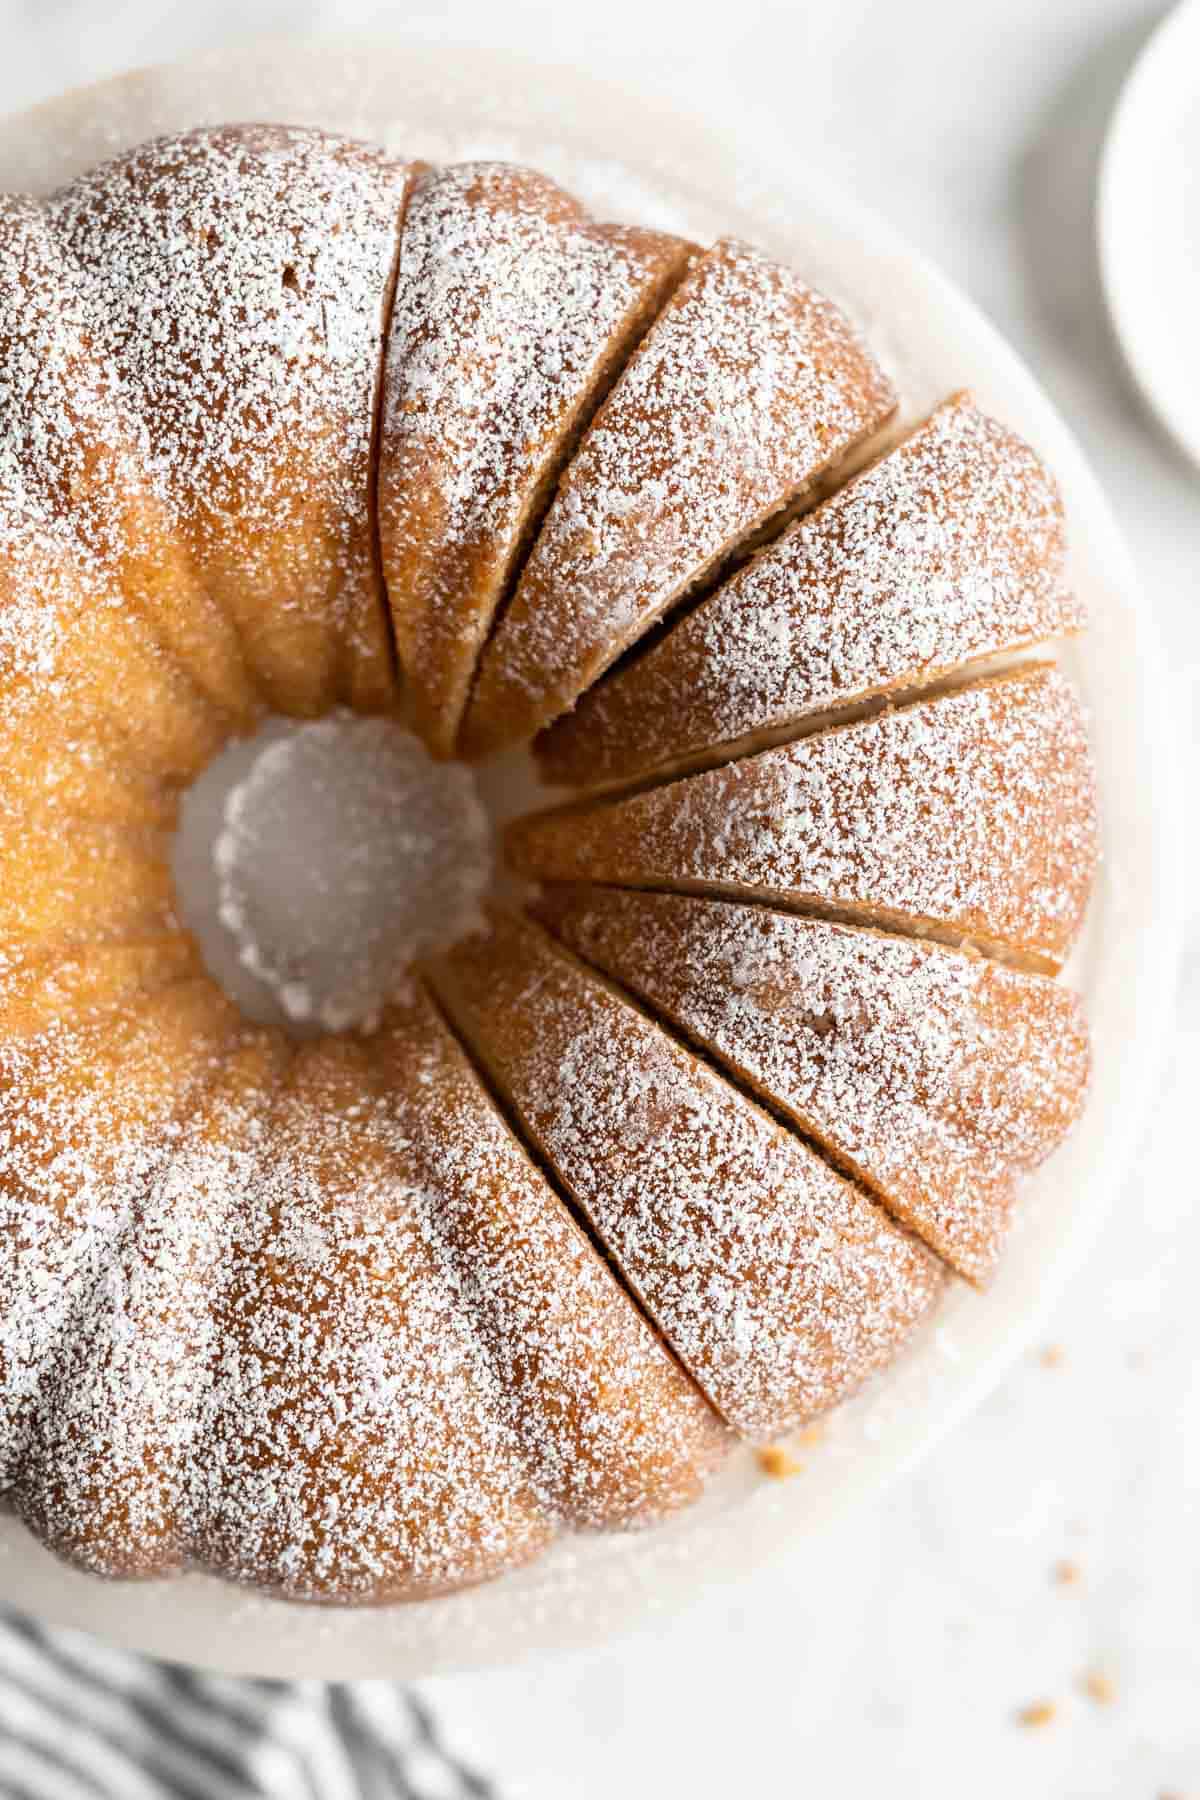 Kentucky Butter Cake on white cake stand against white background